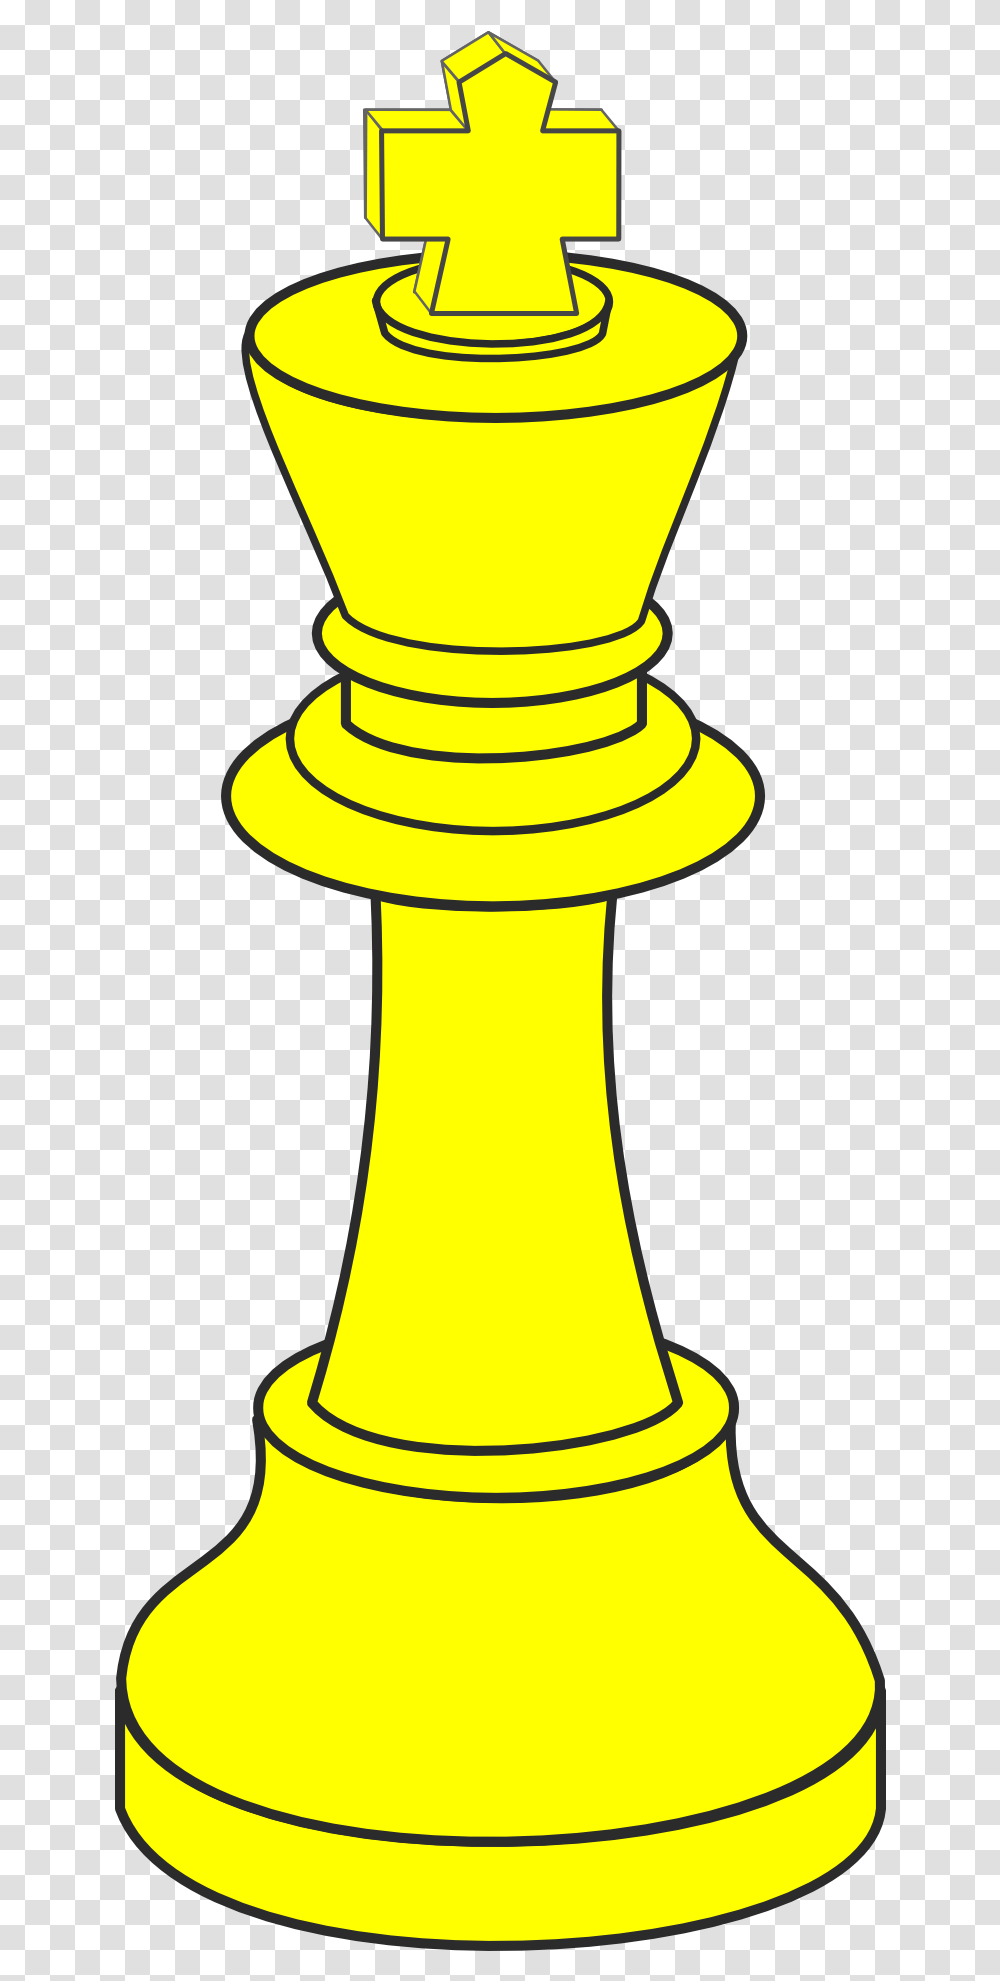 King Chess Piece Free Picture King In Chess Line Art, Lamp, Pin Transparent Png